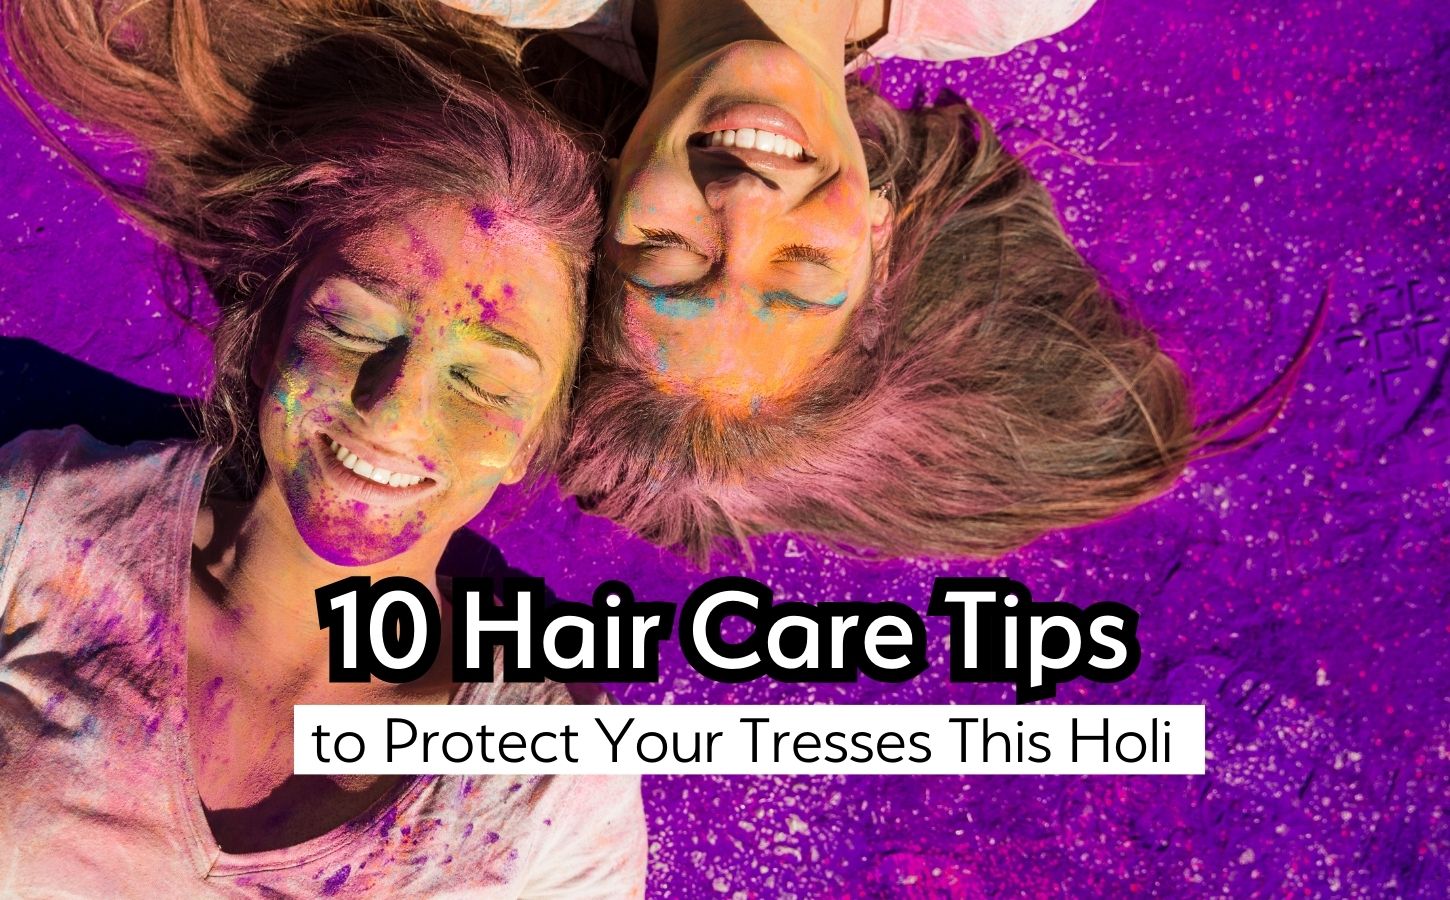 10 Hair Care Tips to Protect Your Tresses This Holi